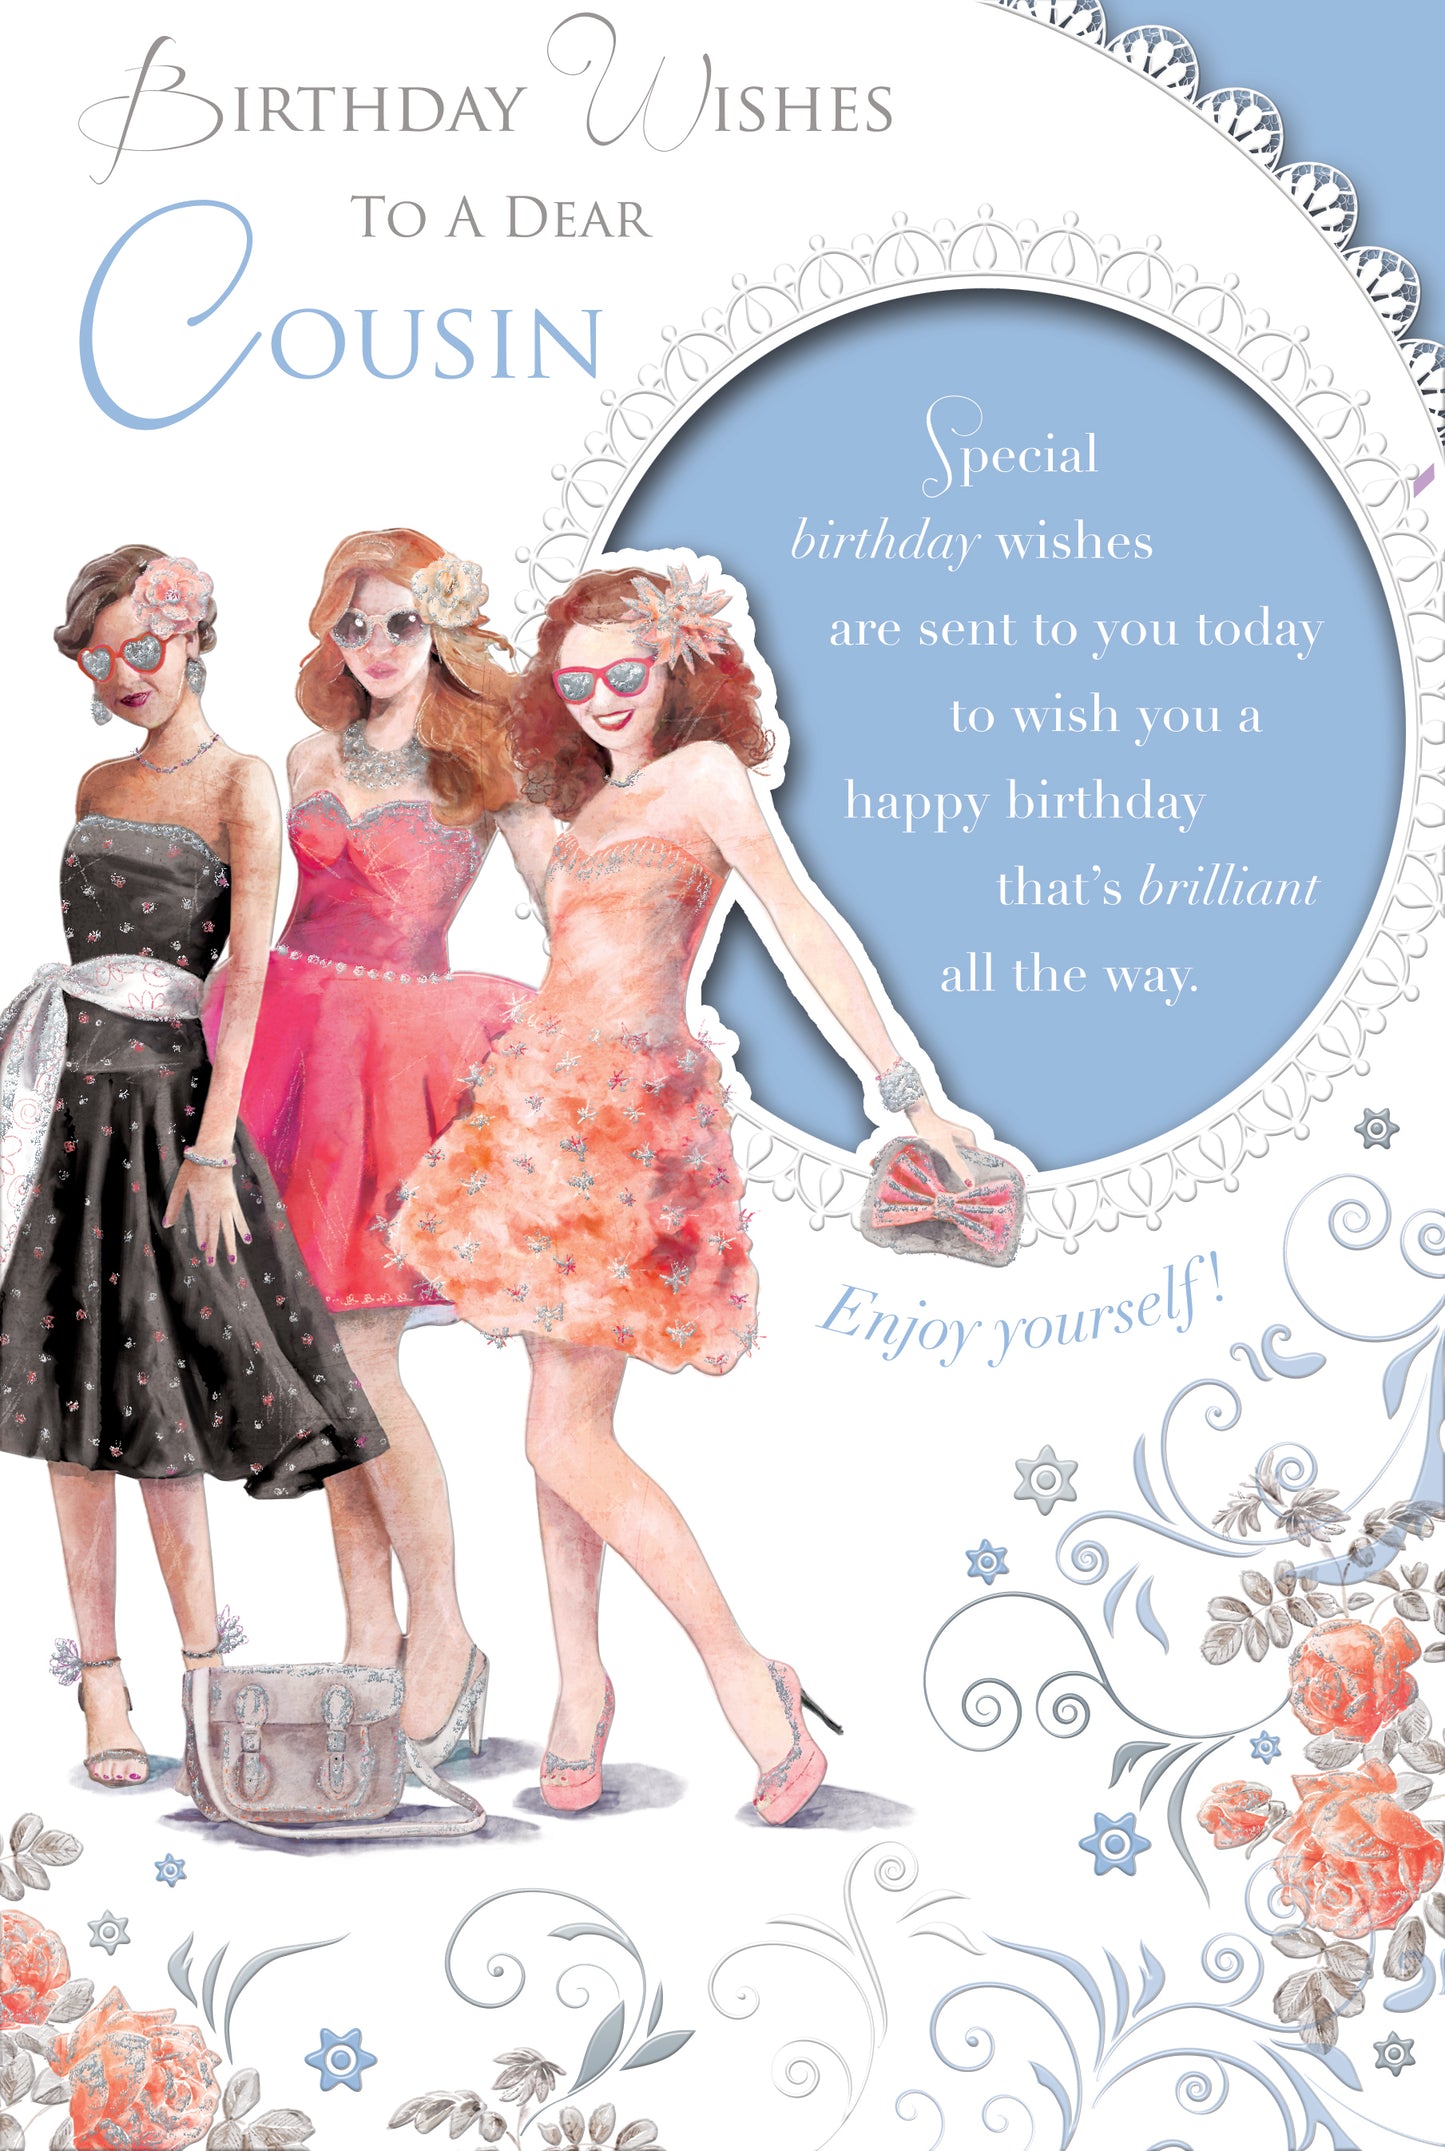 Birthday Wishes To A Dear Cousin Beautiful Ladies Design Female Celebrity Style Card